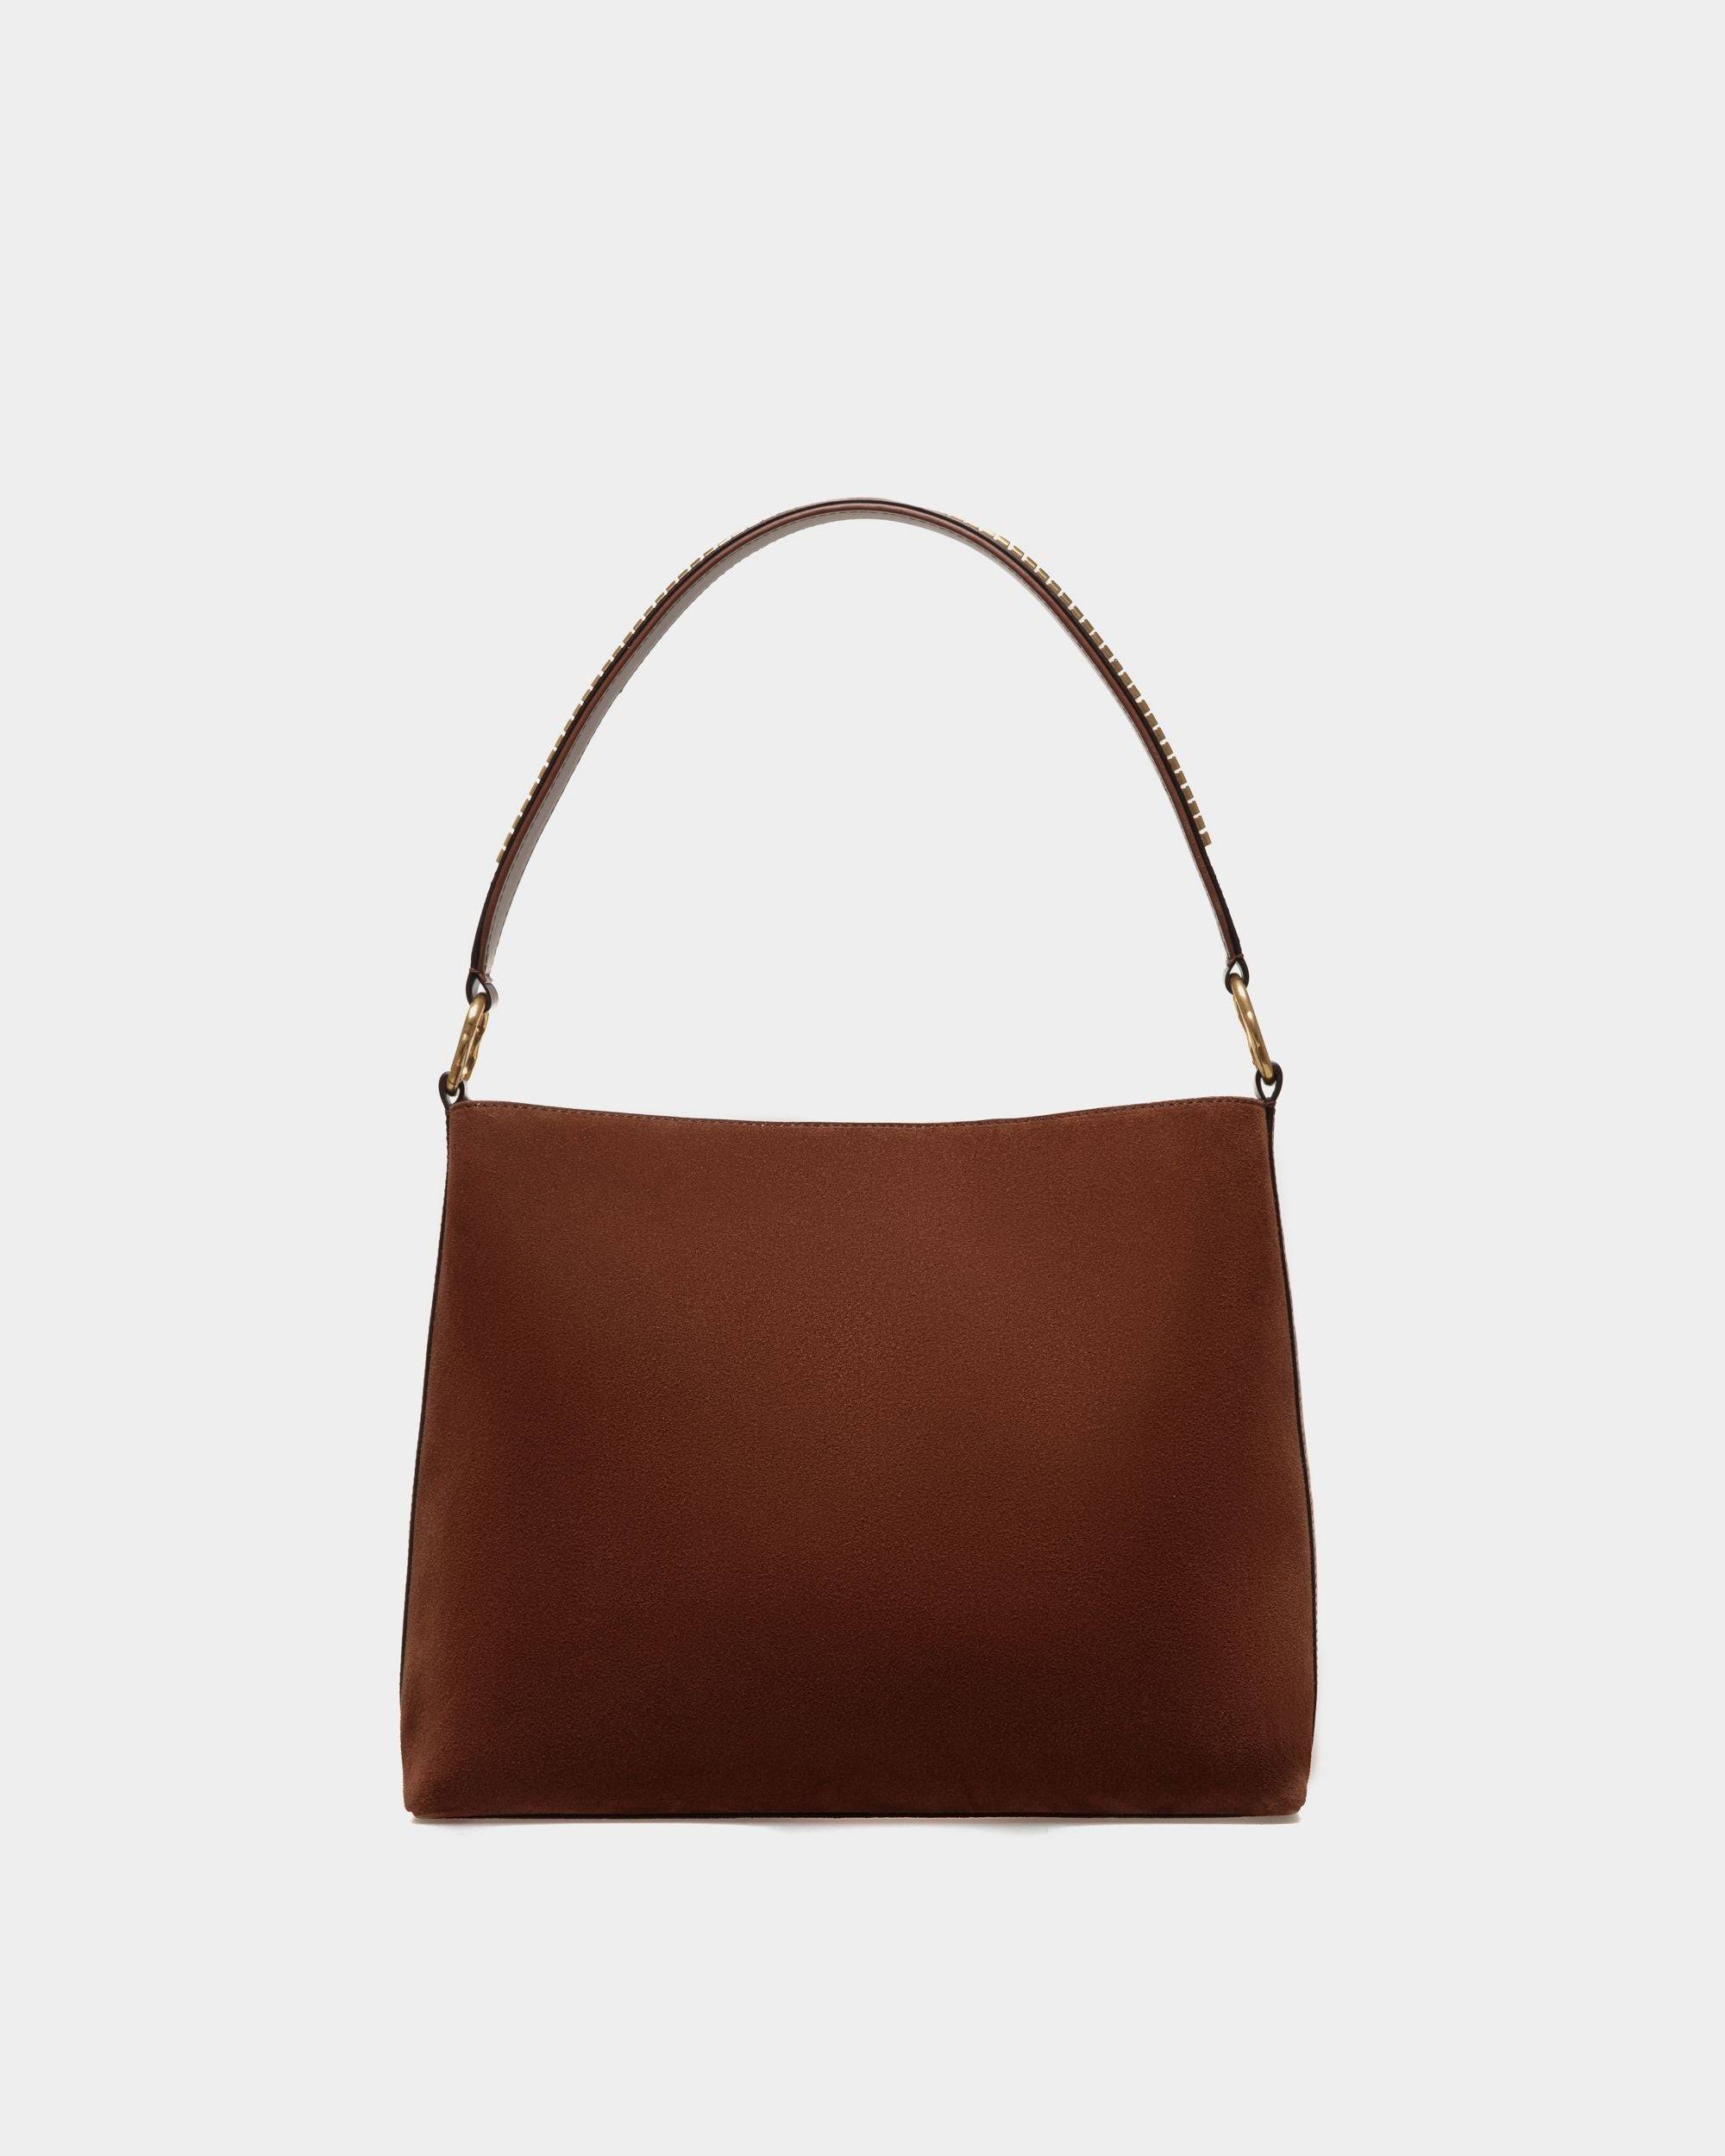 Arkle | Women's Hobo Bag in Brown Suede | Bally | Still Life Back